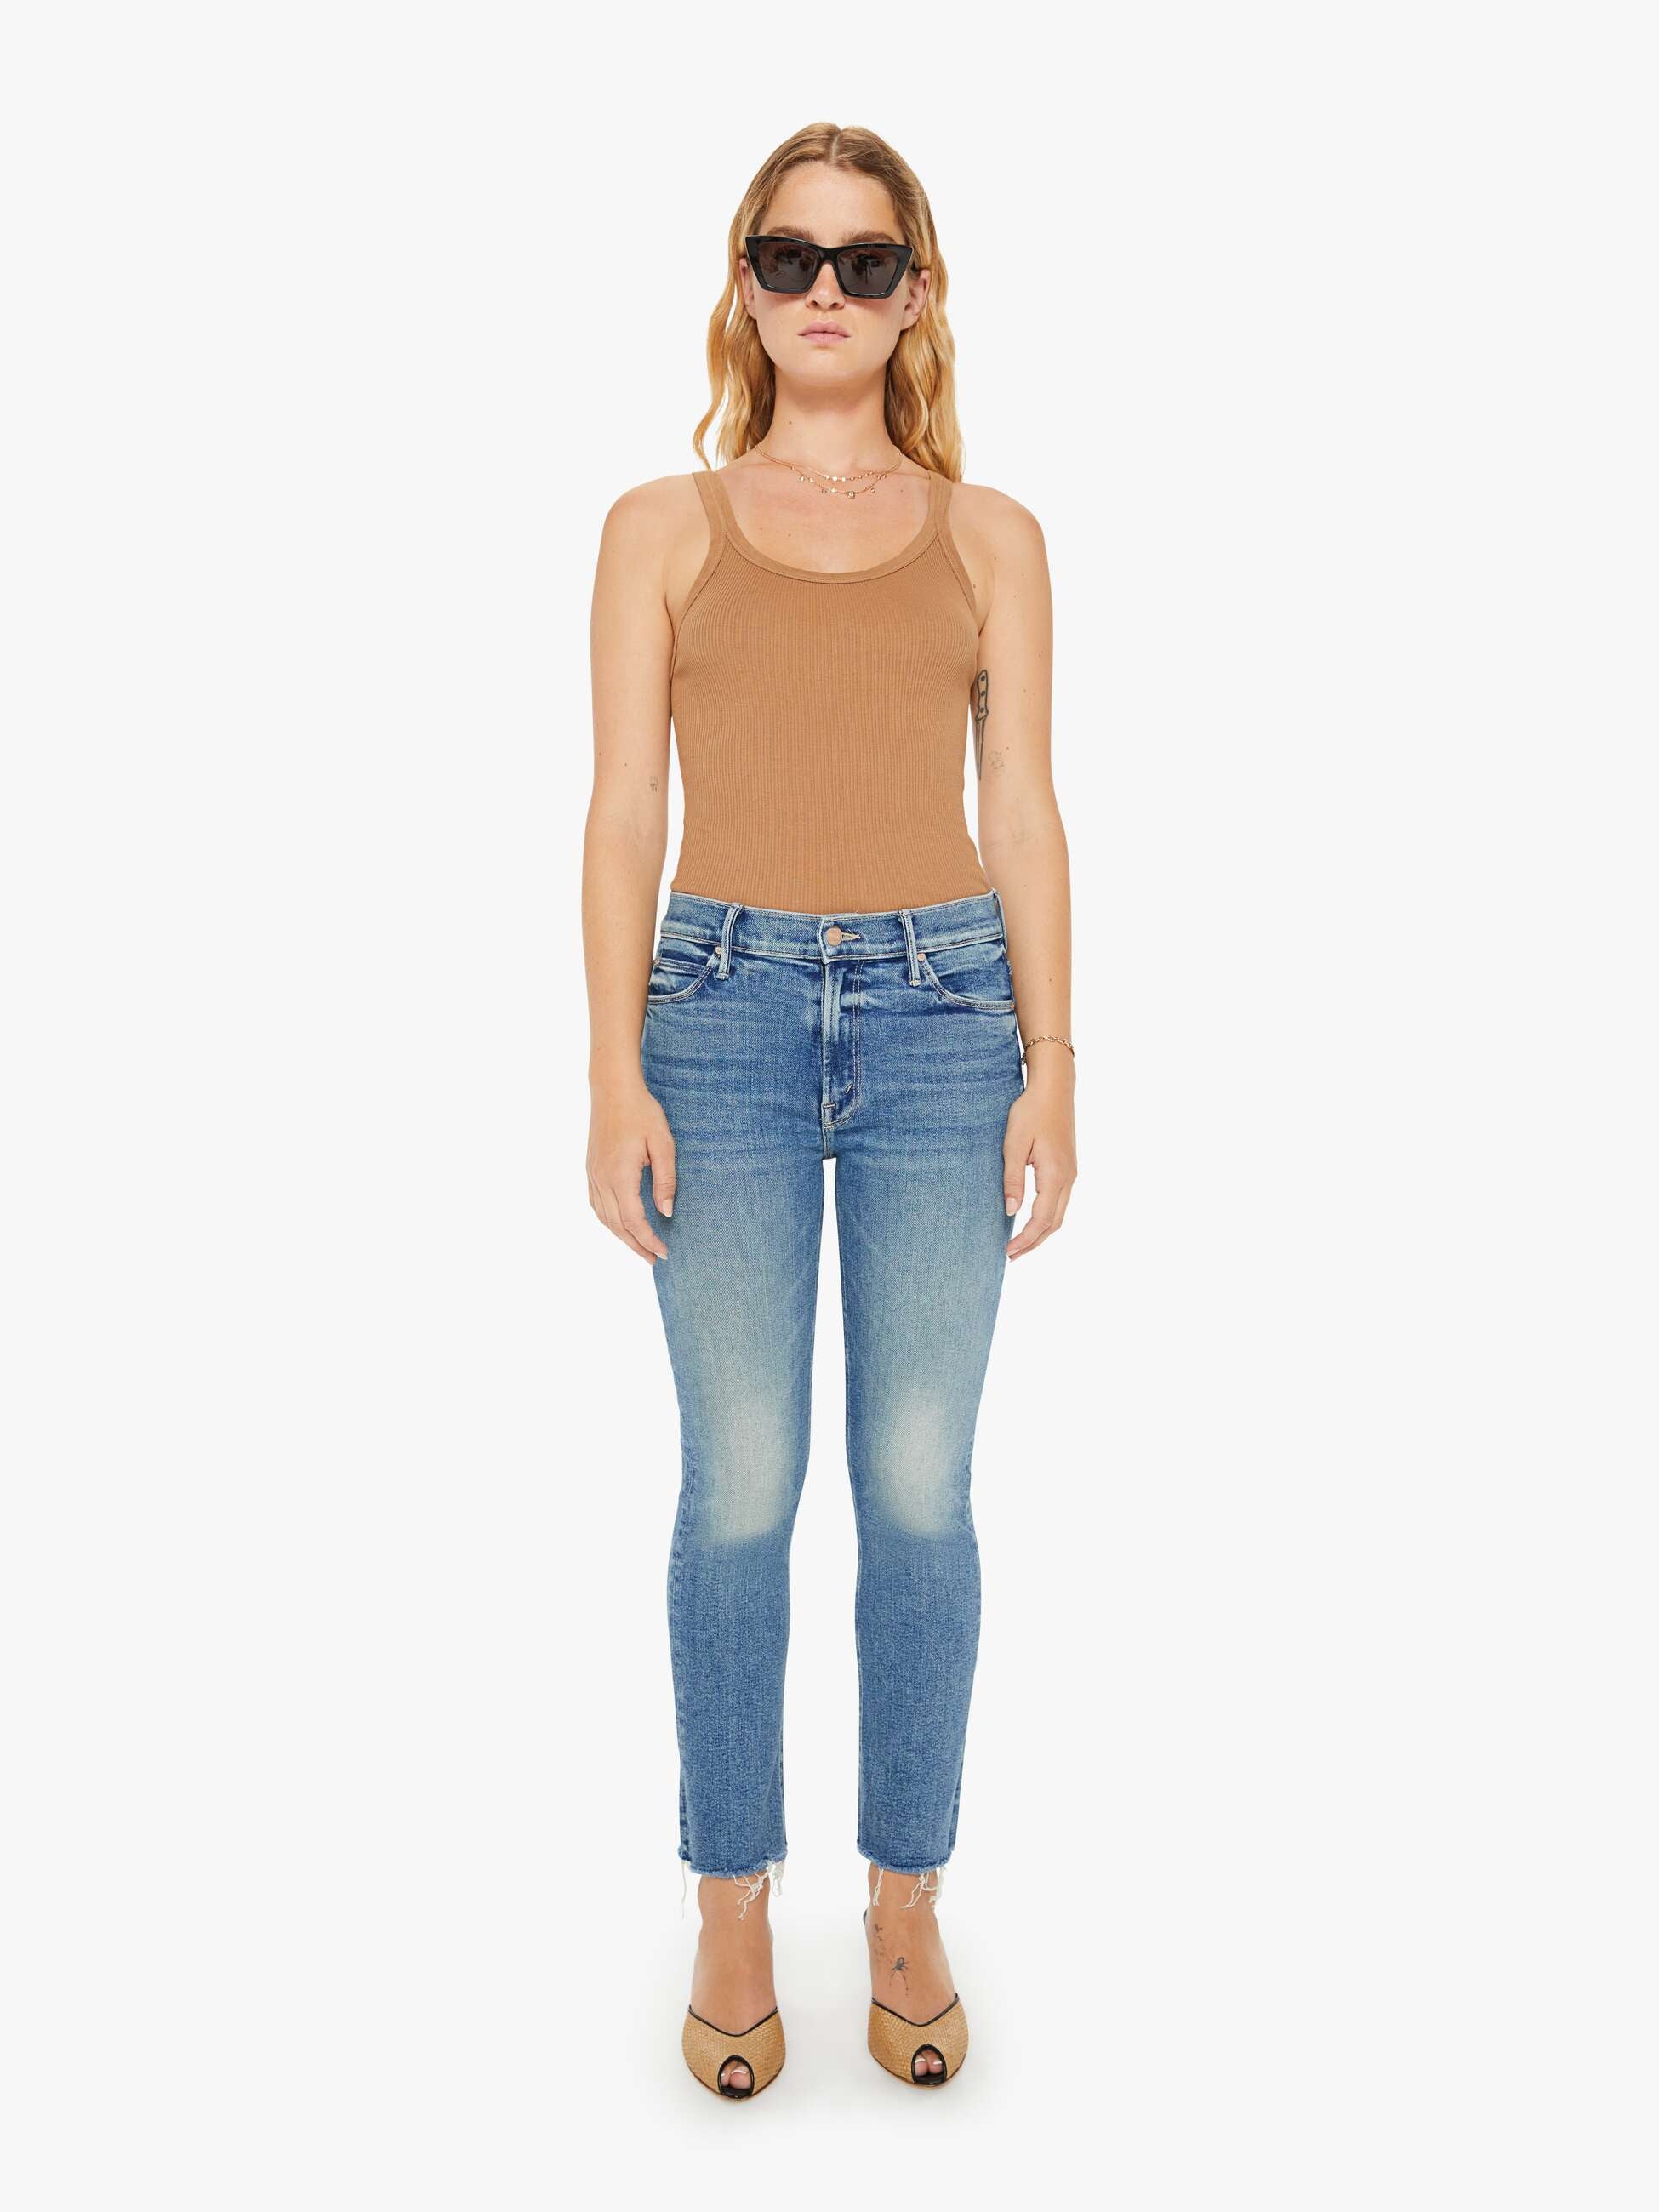 Buy Arrow Blue Jeans Company Clothing Online in India - NNNOW